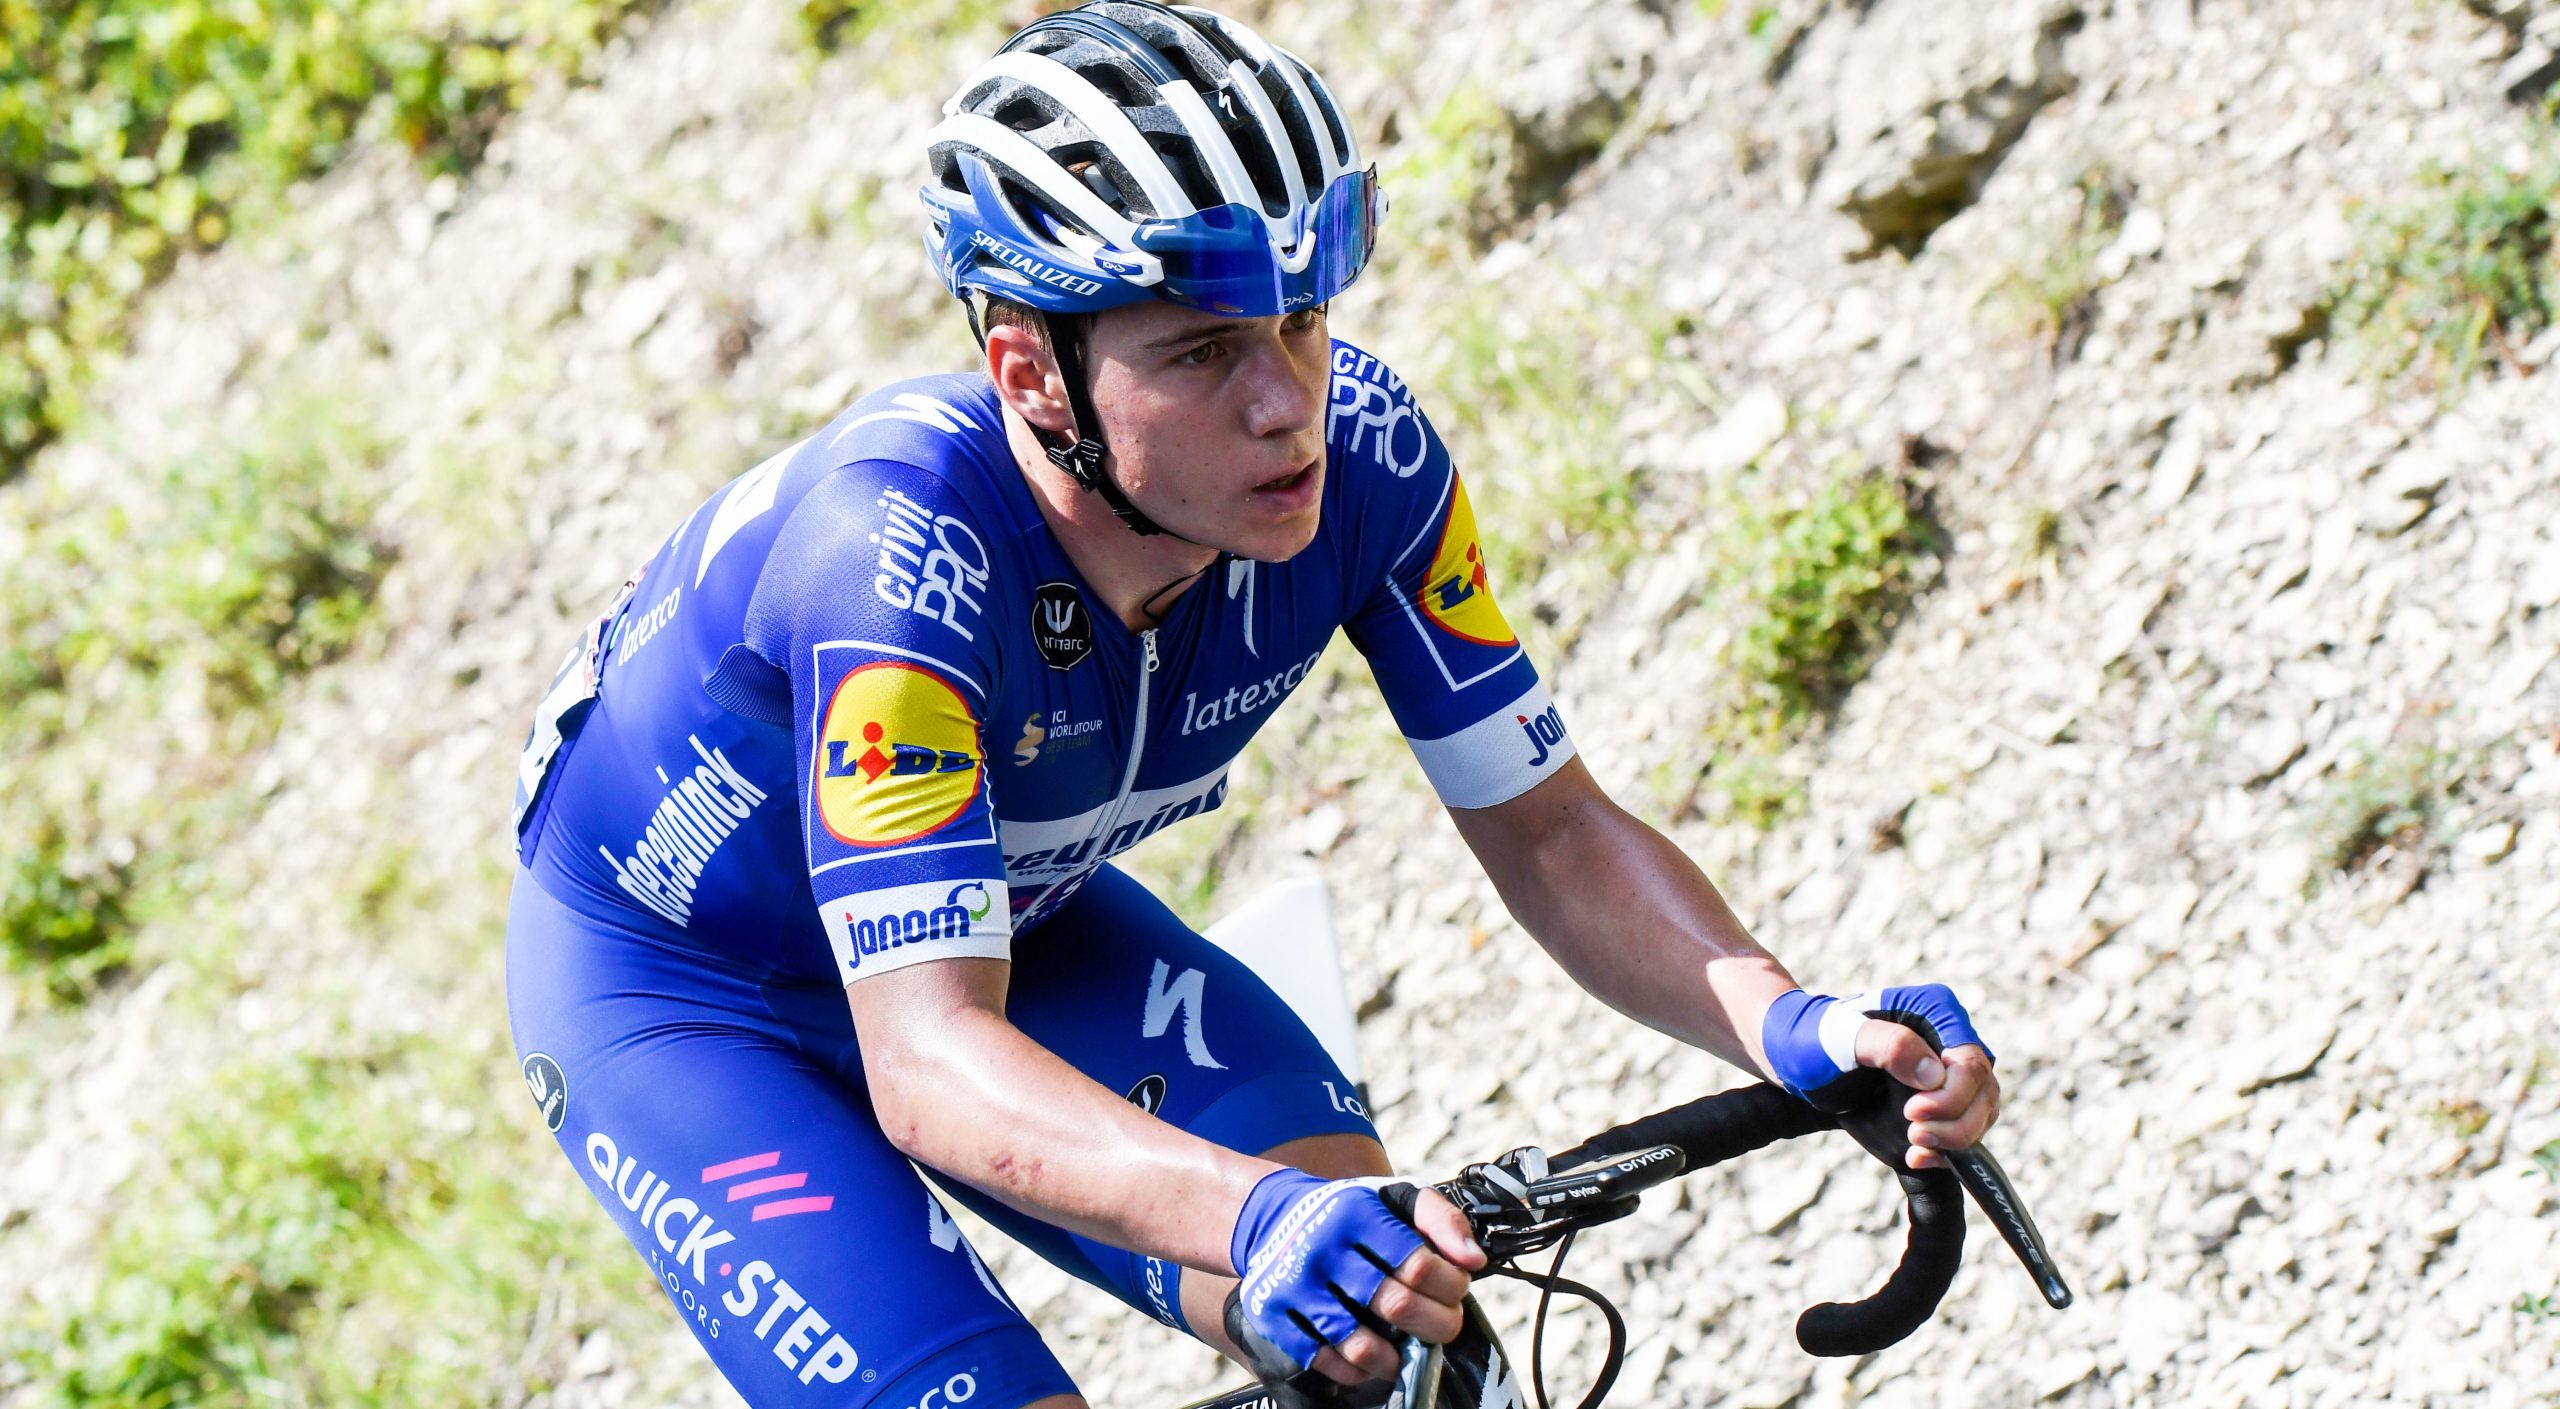 Deceuninck - Quick-Step Cycling team's Remco Evenepoel is giving his during a cycling stage